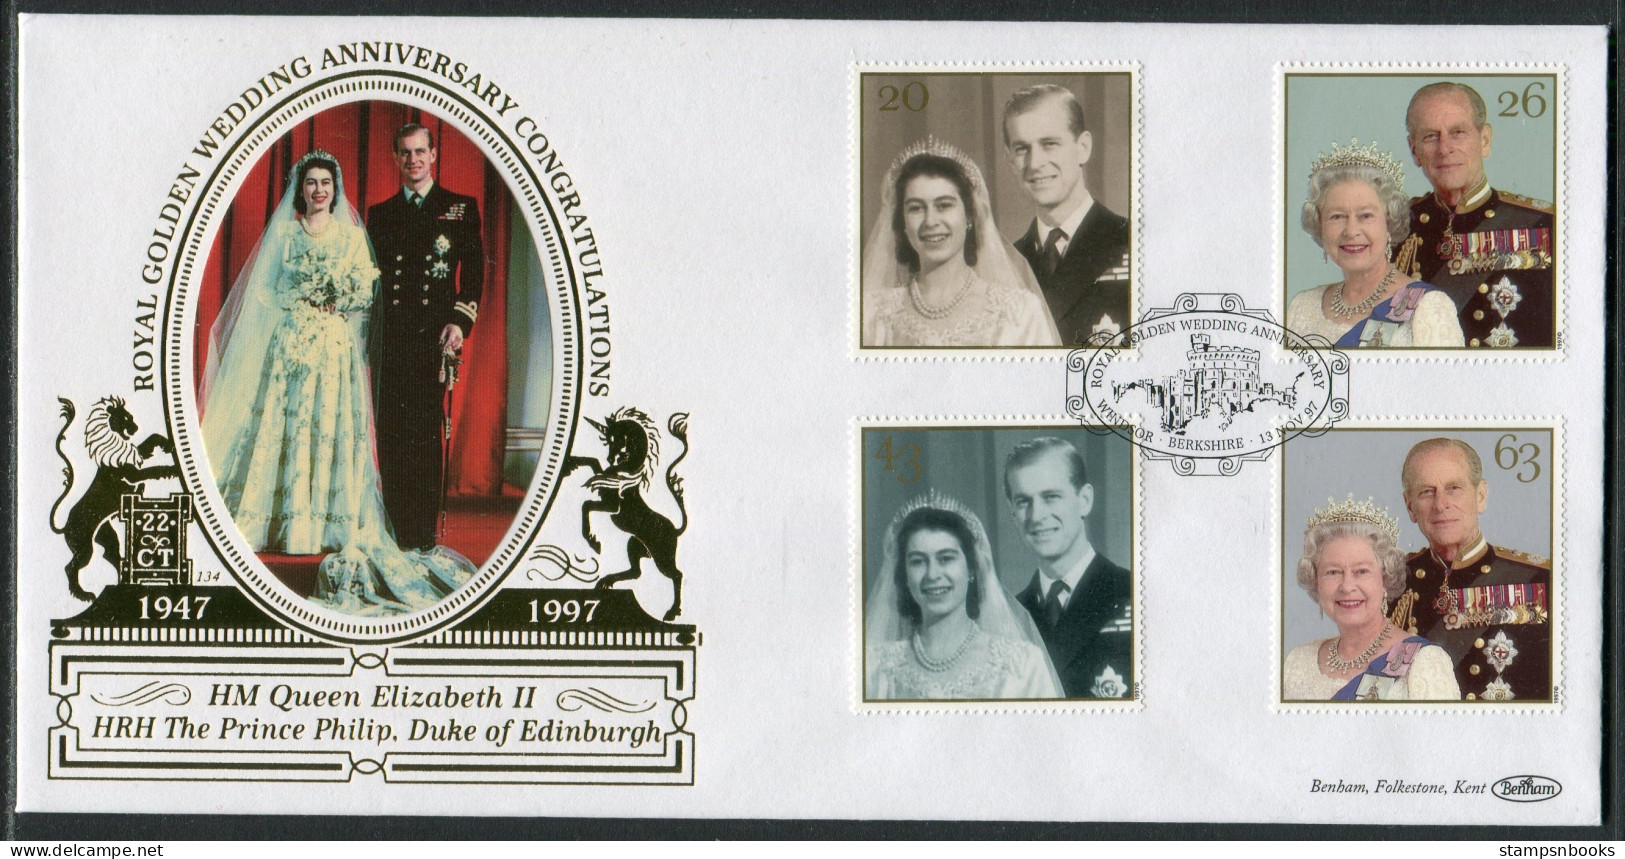 1997 GB Royal Golden Wedding, Queen Elizabeth & Prince Philip First Day Cover, Windsor Benham 22 Carat Gold FDC - 1991-2000 Decimal Issues